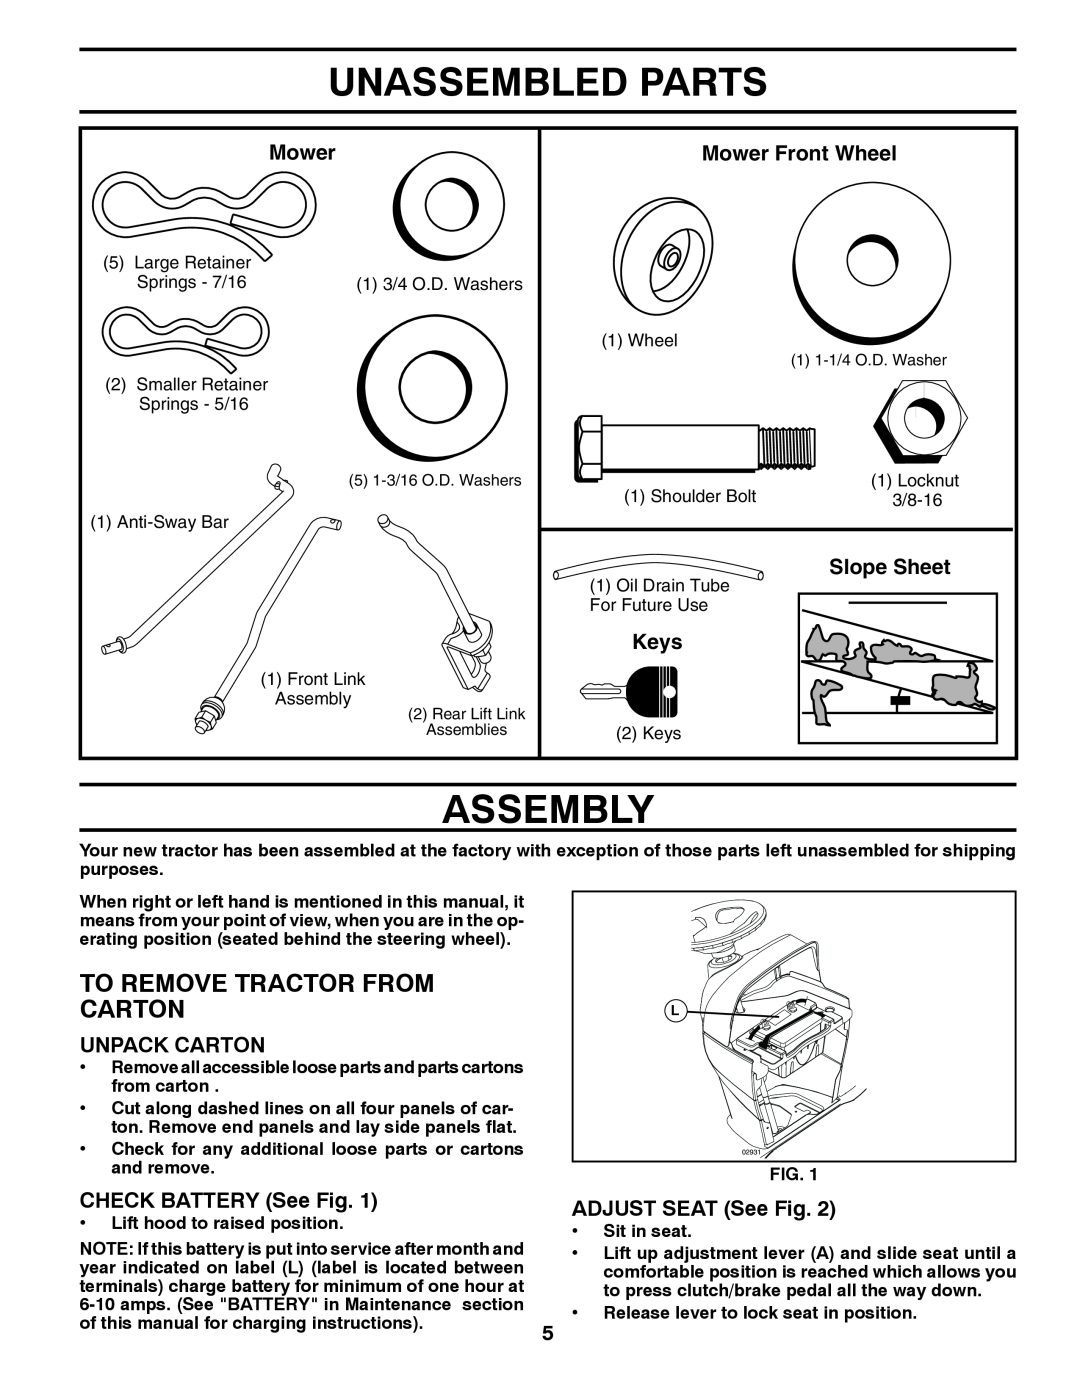 Poulan 417920 manual Unassembled Parts, Assembly, To Remove Tractor From Carton, Mower Front Wheel, Slope Sheet, Keys 